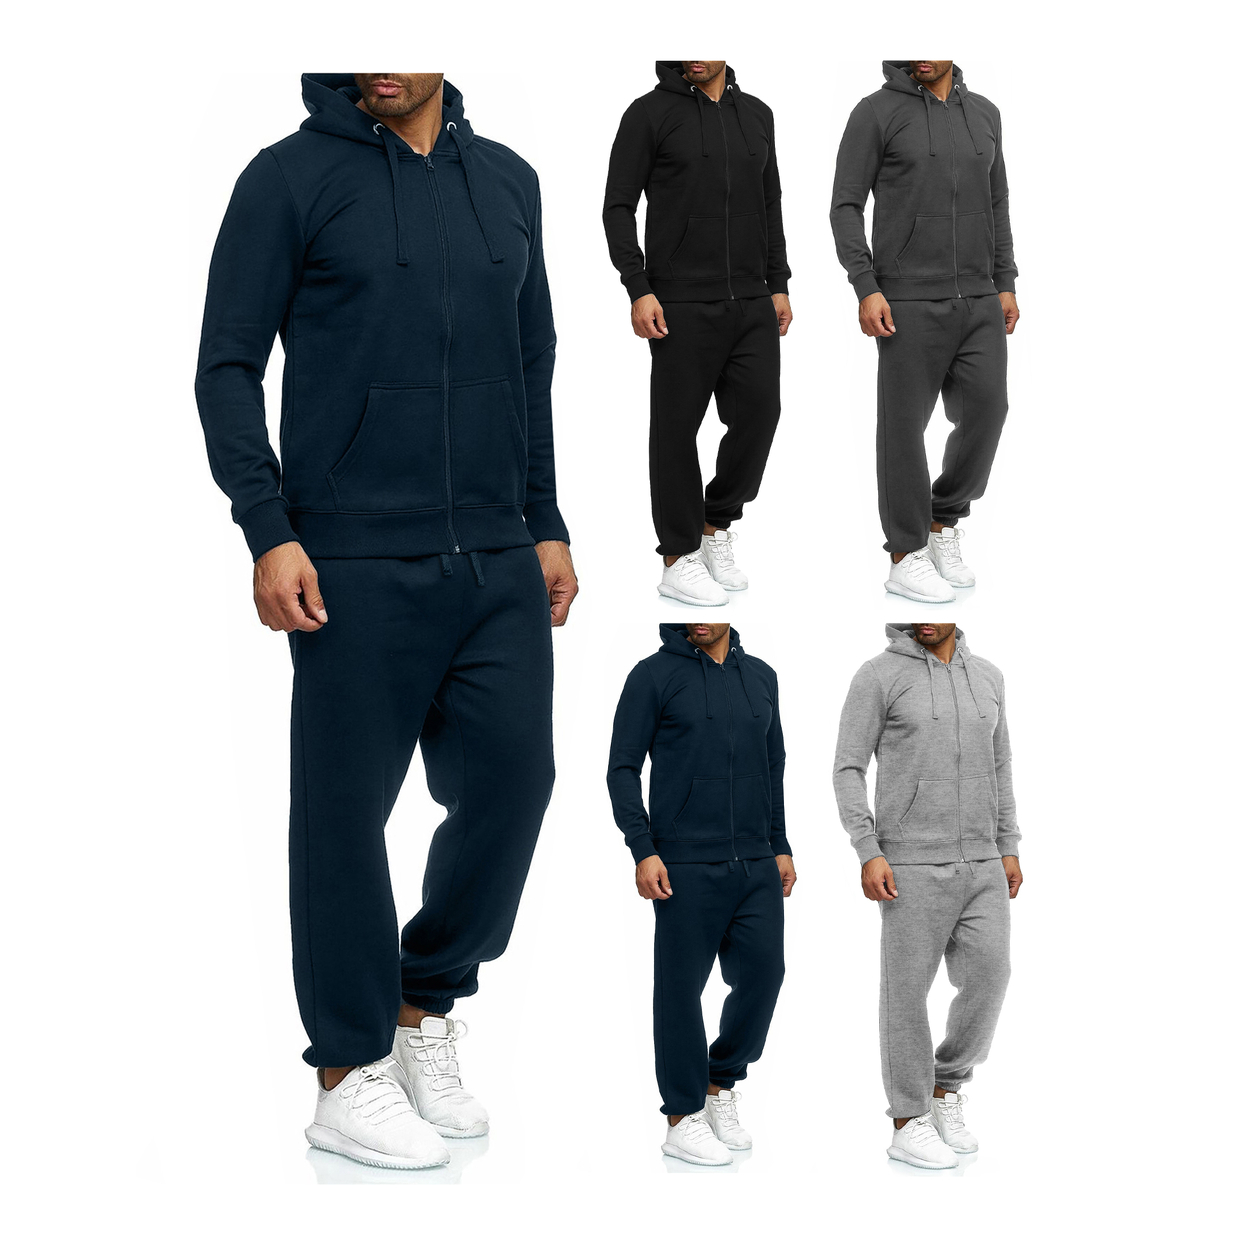 Men's Casual Big & Tall Athletic Active Winter Warm Fleece Lined Full Zip Tracksuit Jogger Set - Black, Xx-large